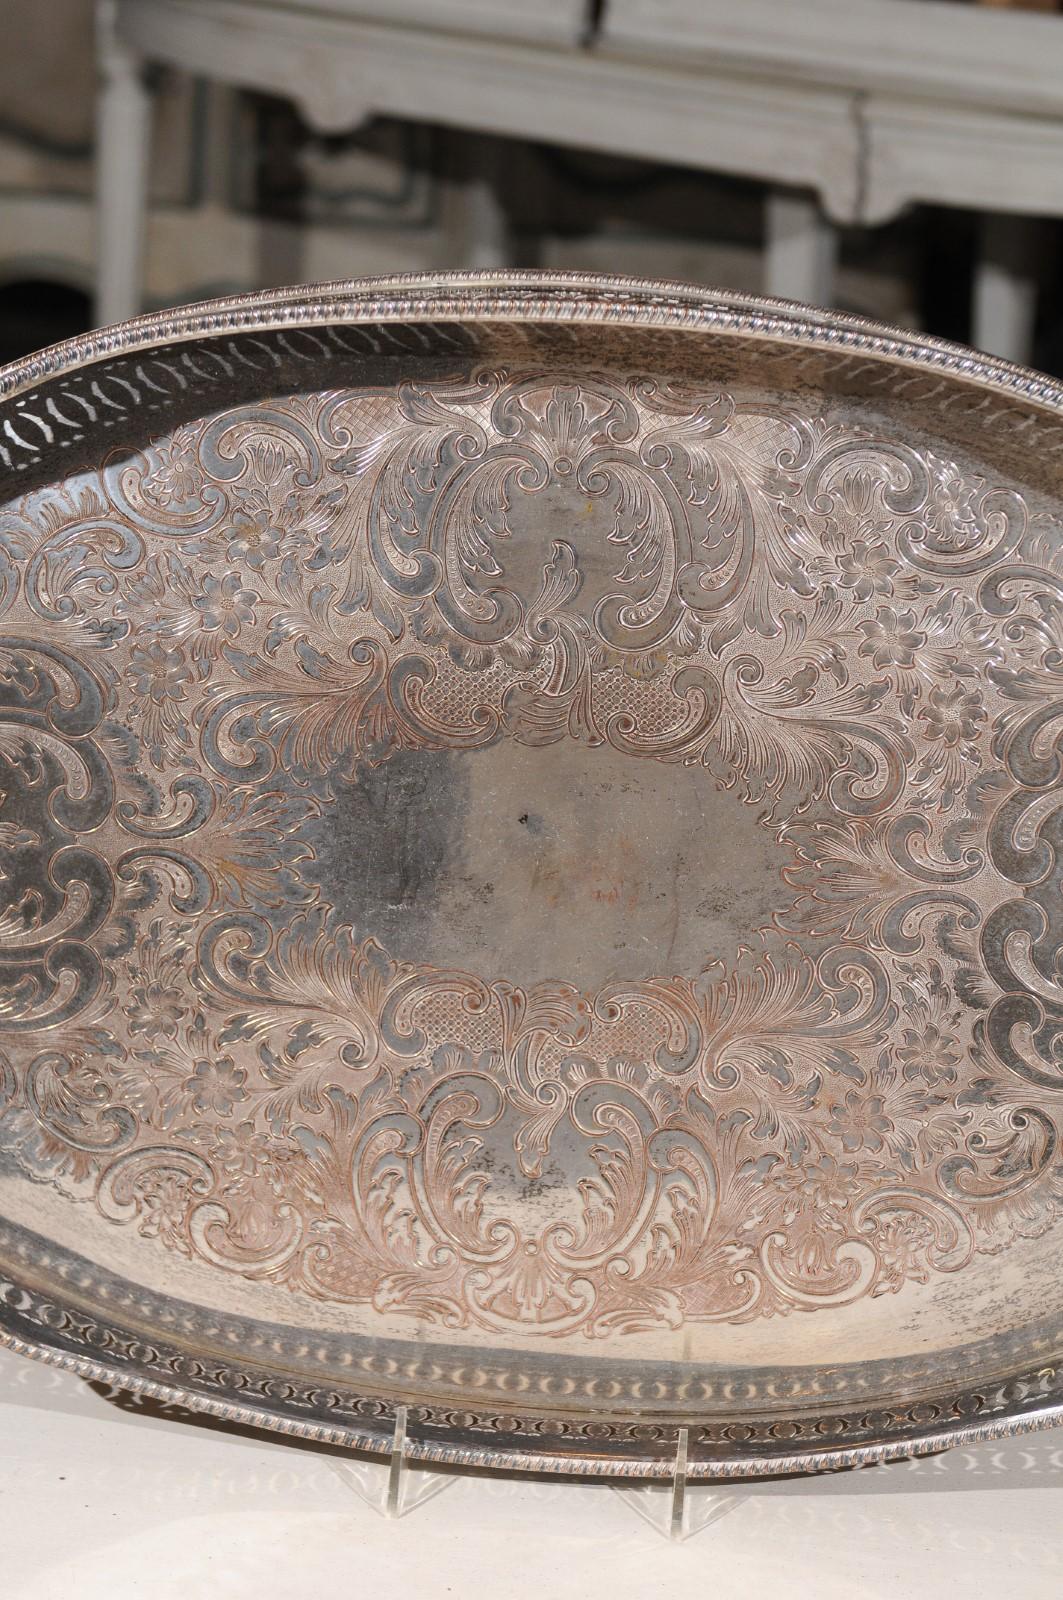 20th Century English Edwardian Period Silver Plated Tray with Pierced Motifs and C-Scrolls For Sale